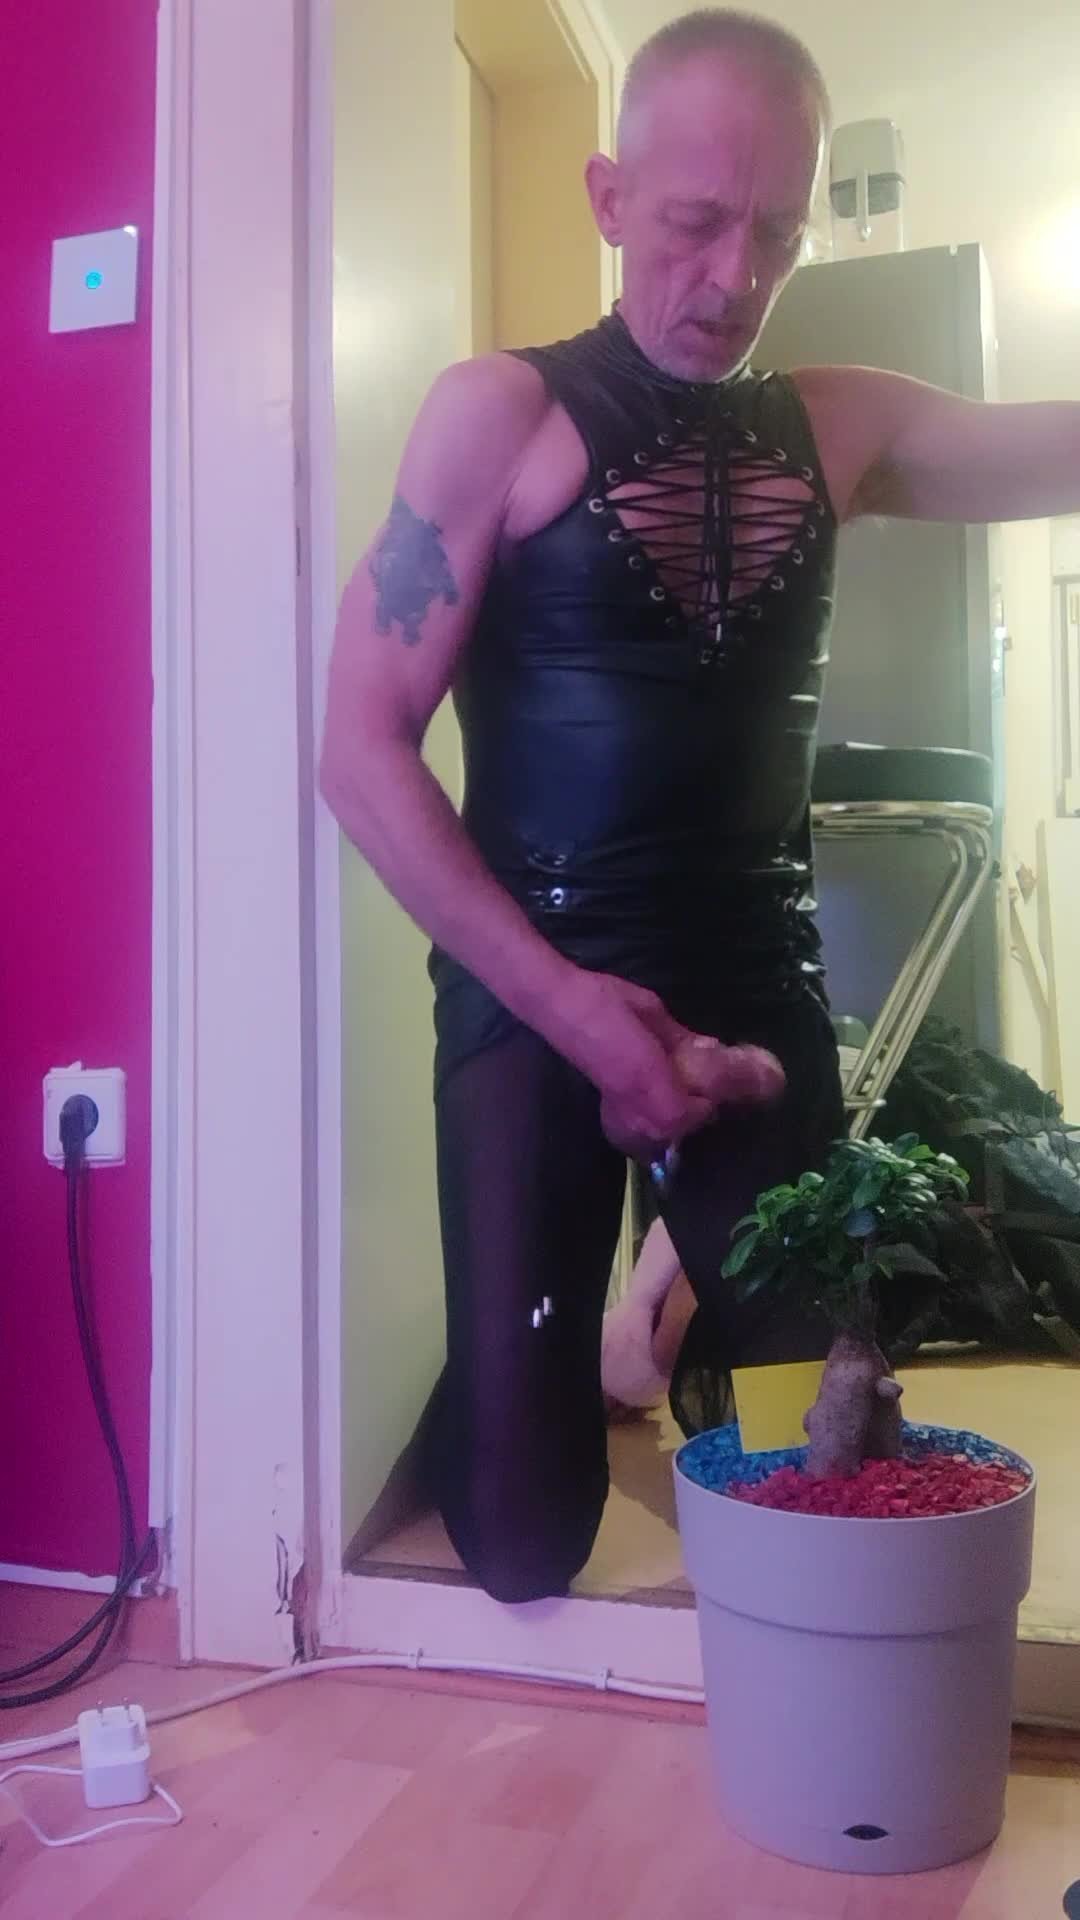 Video post by Biancasissy